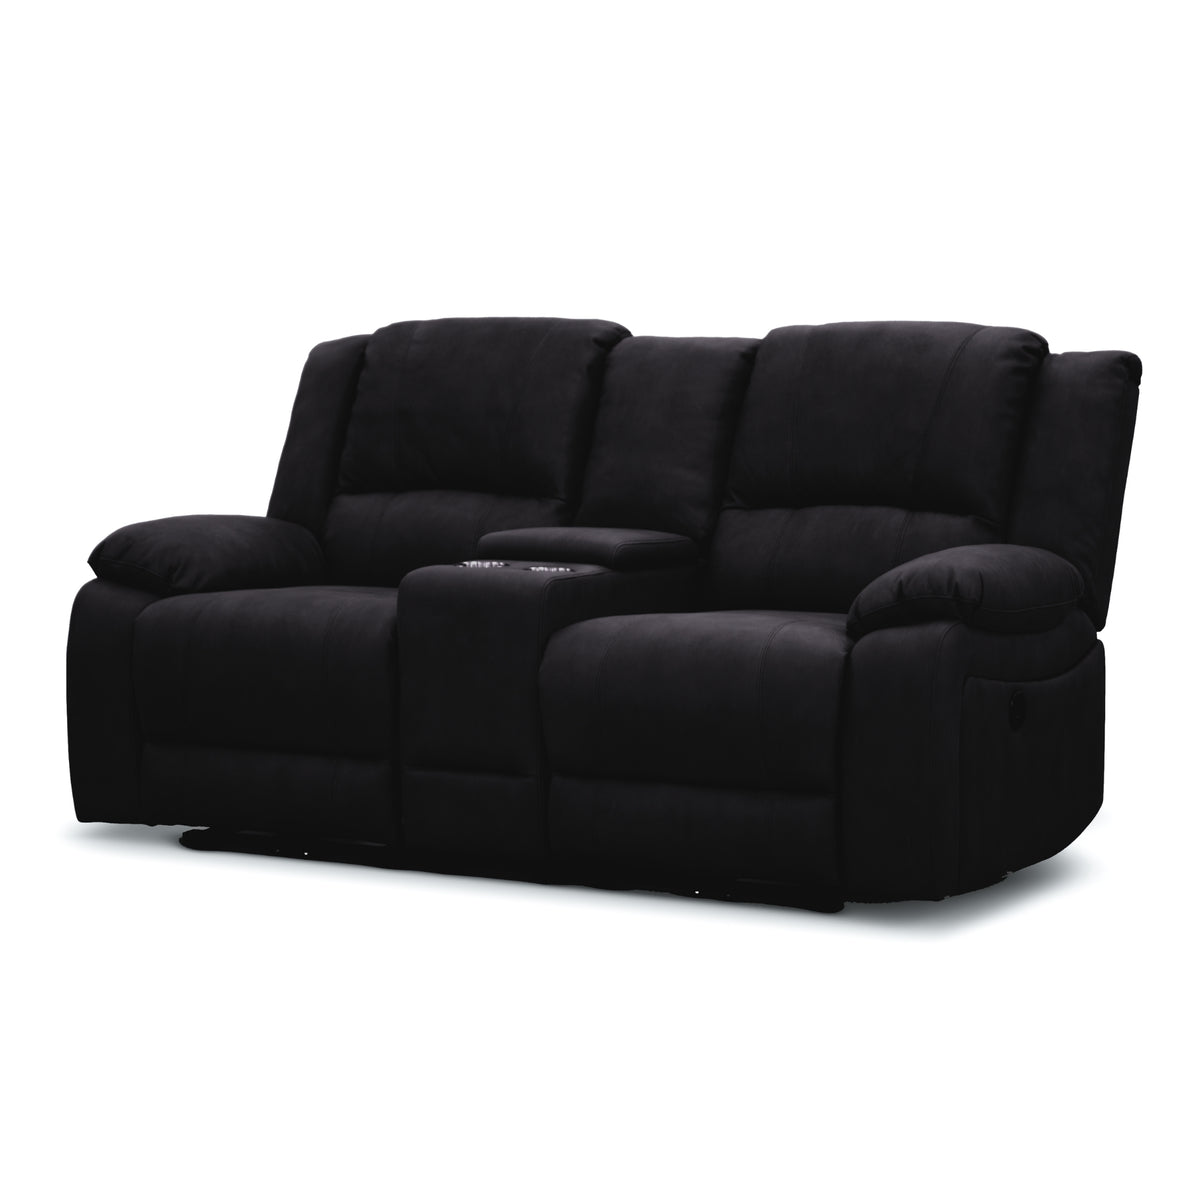 Anderson Fabric Electric Recliner Sofa Lounge Chair ONYX Black 2 + 3 Seater